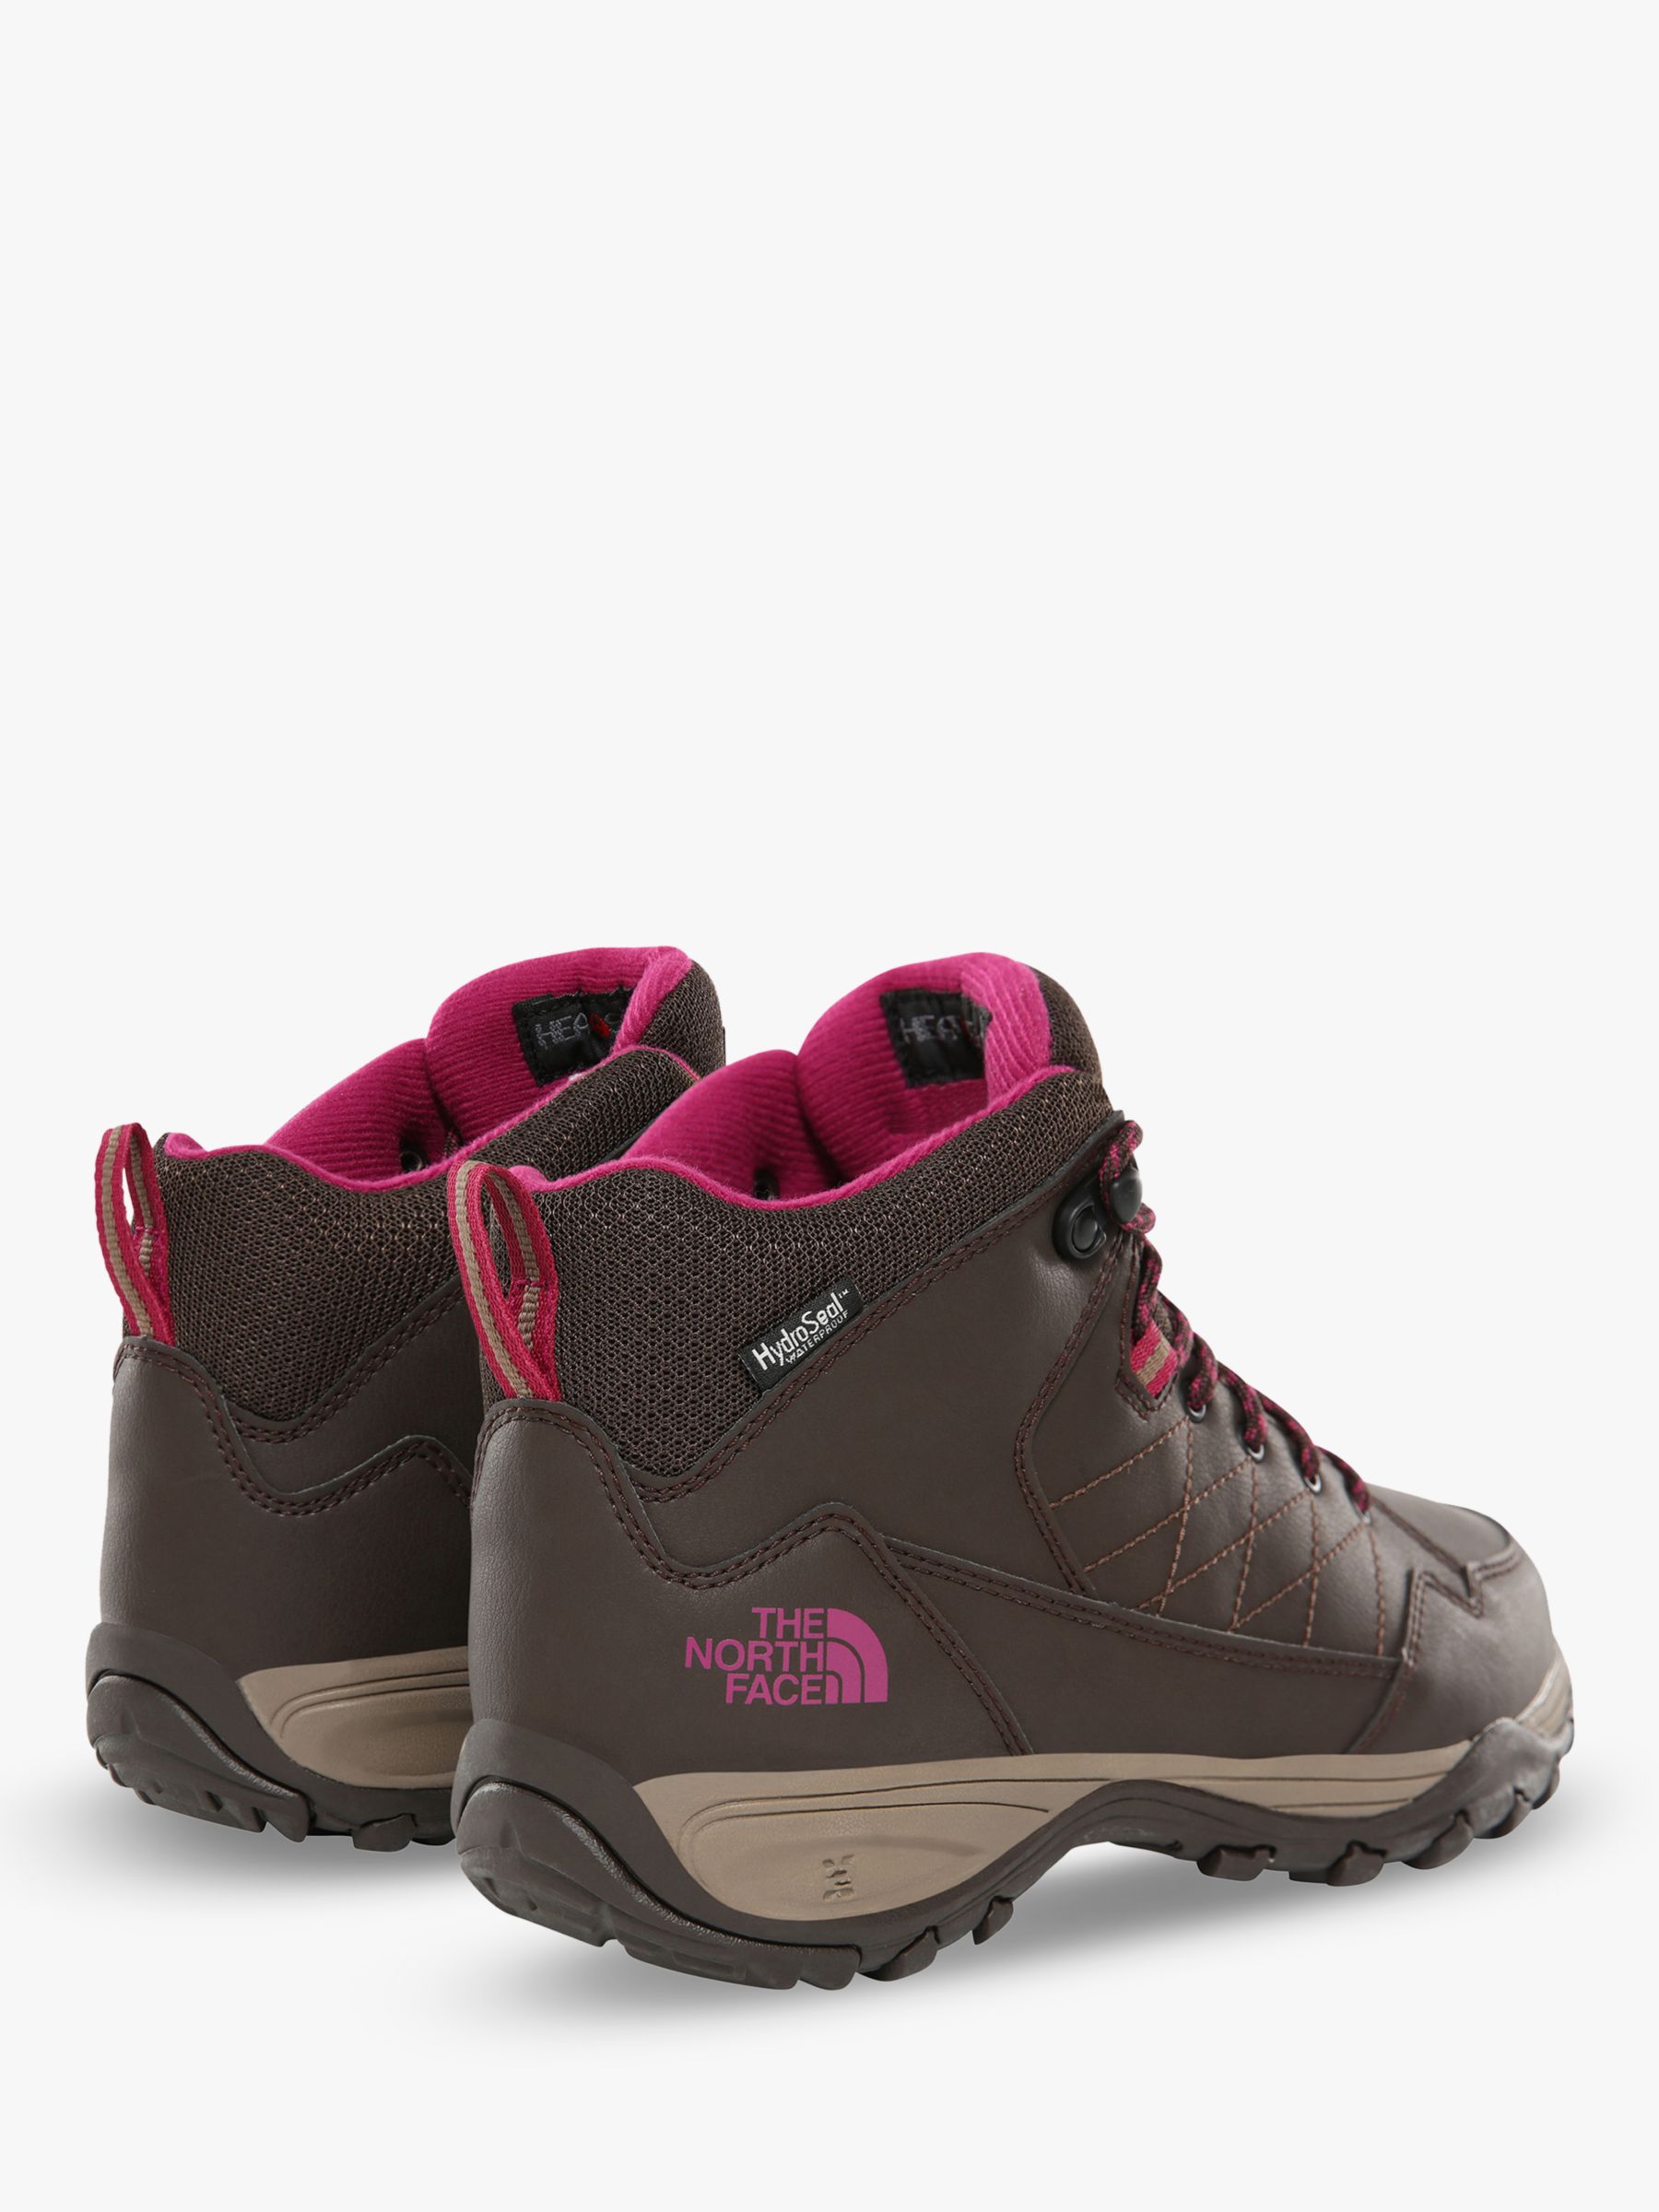 womens waterproof boots north face